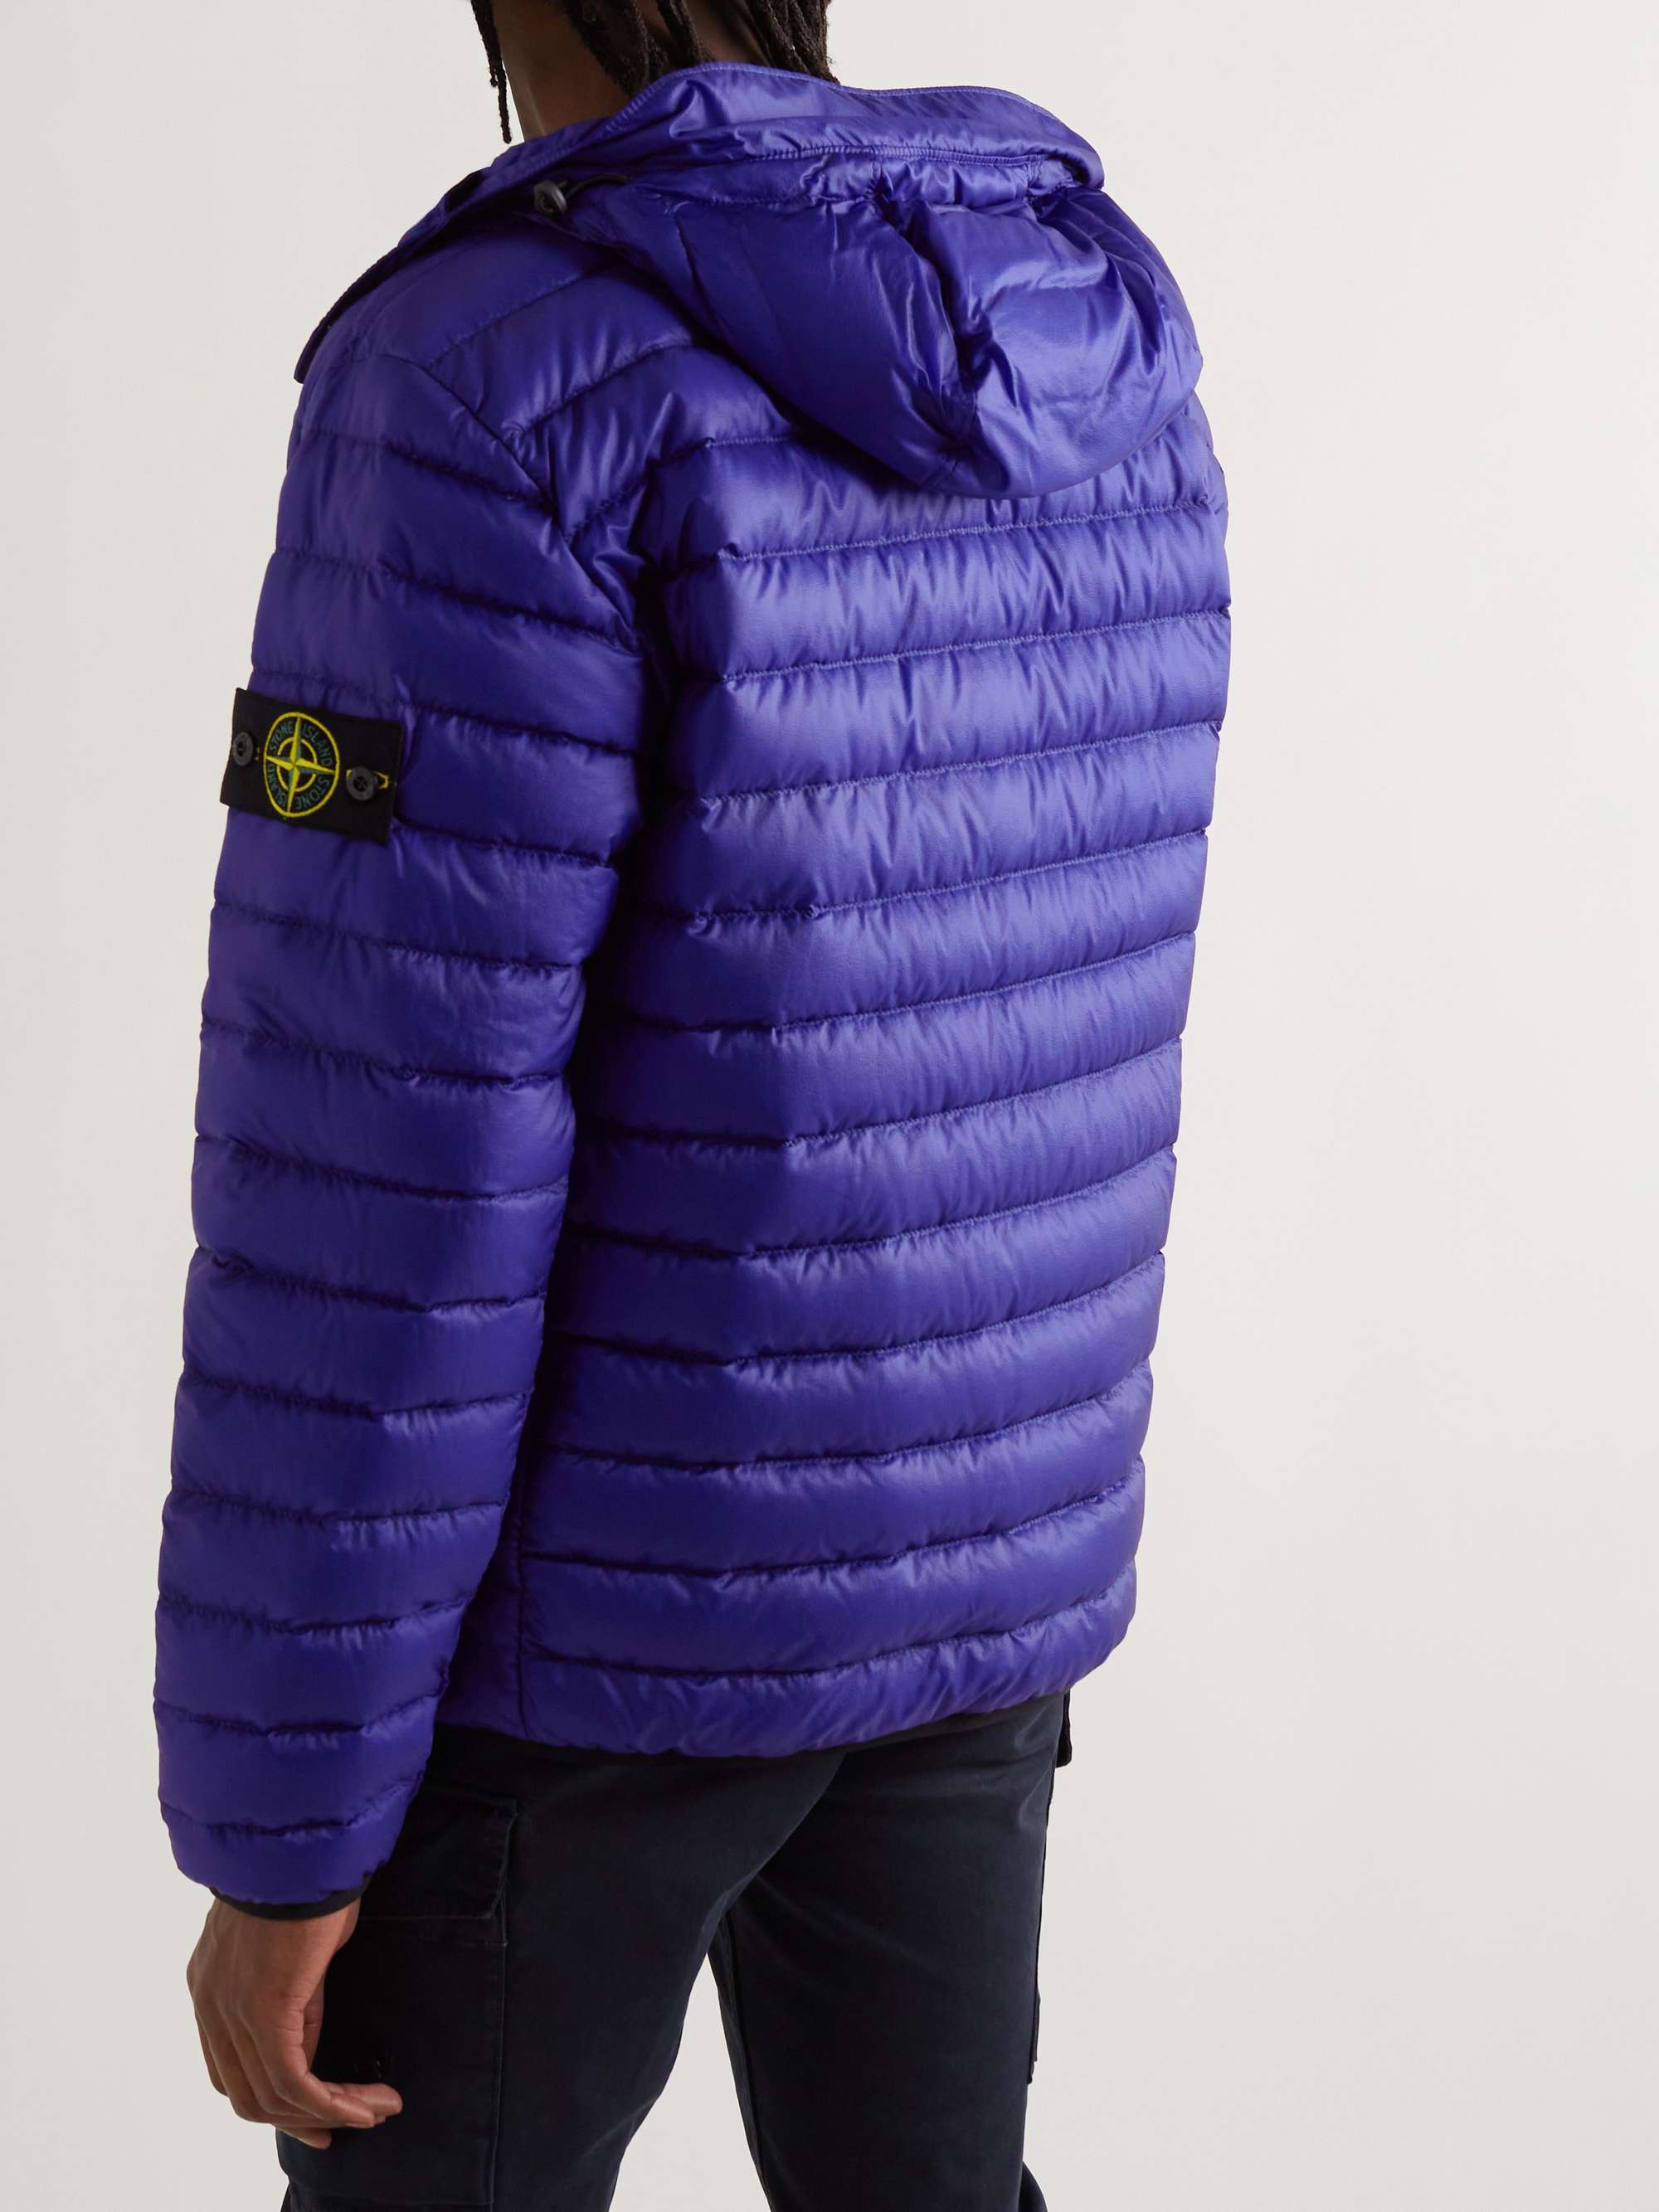 STONE ISLAND Logo-Appliquéd Quilted Cotton and Nylon Tela-Blend Hooded Down Jacket